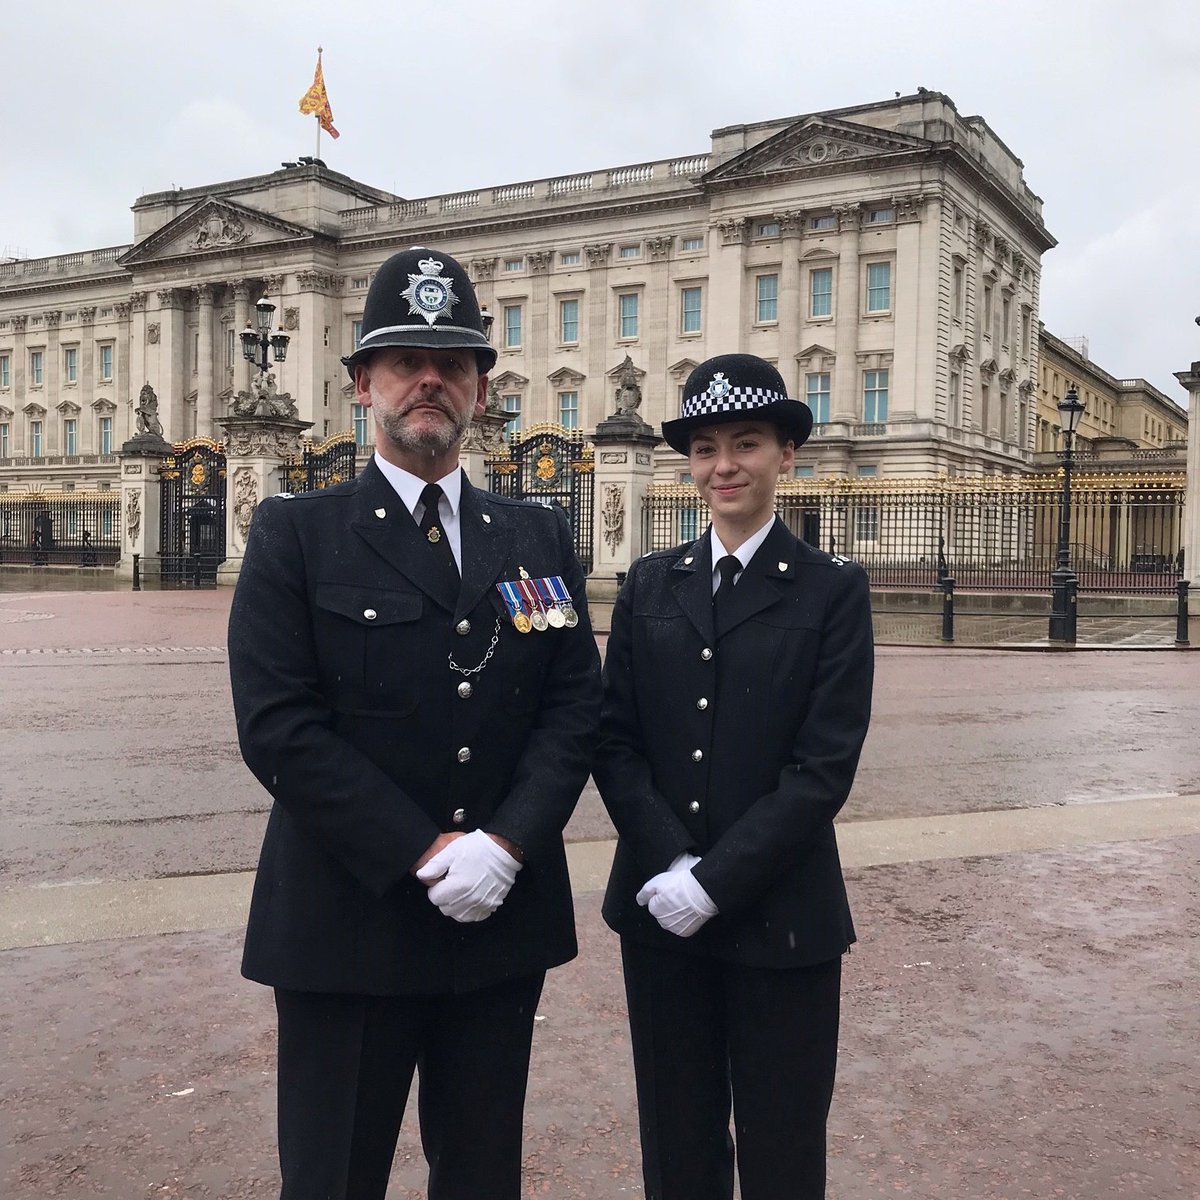 Leicestershire PCs Adam Rowlands & Paige Eaves's spirits were not dampened by the rain, as they took on the role as Ceremonial Cadre Officers, lining the streets along The Mall and Whitehall, during yesterday's Coronation.